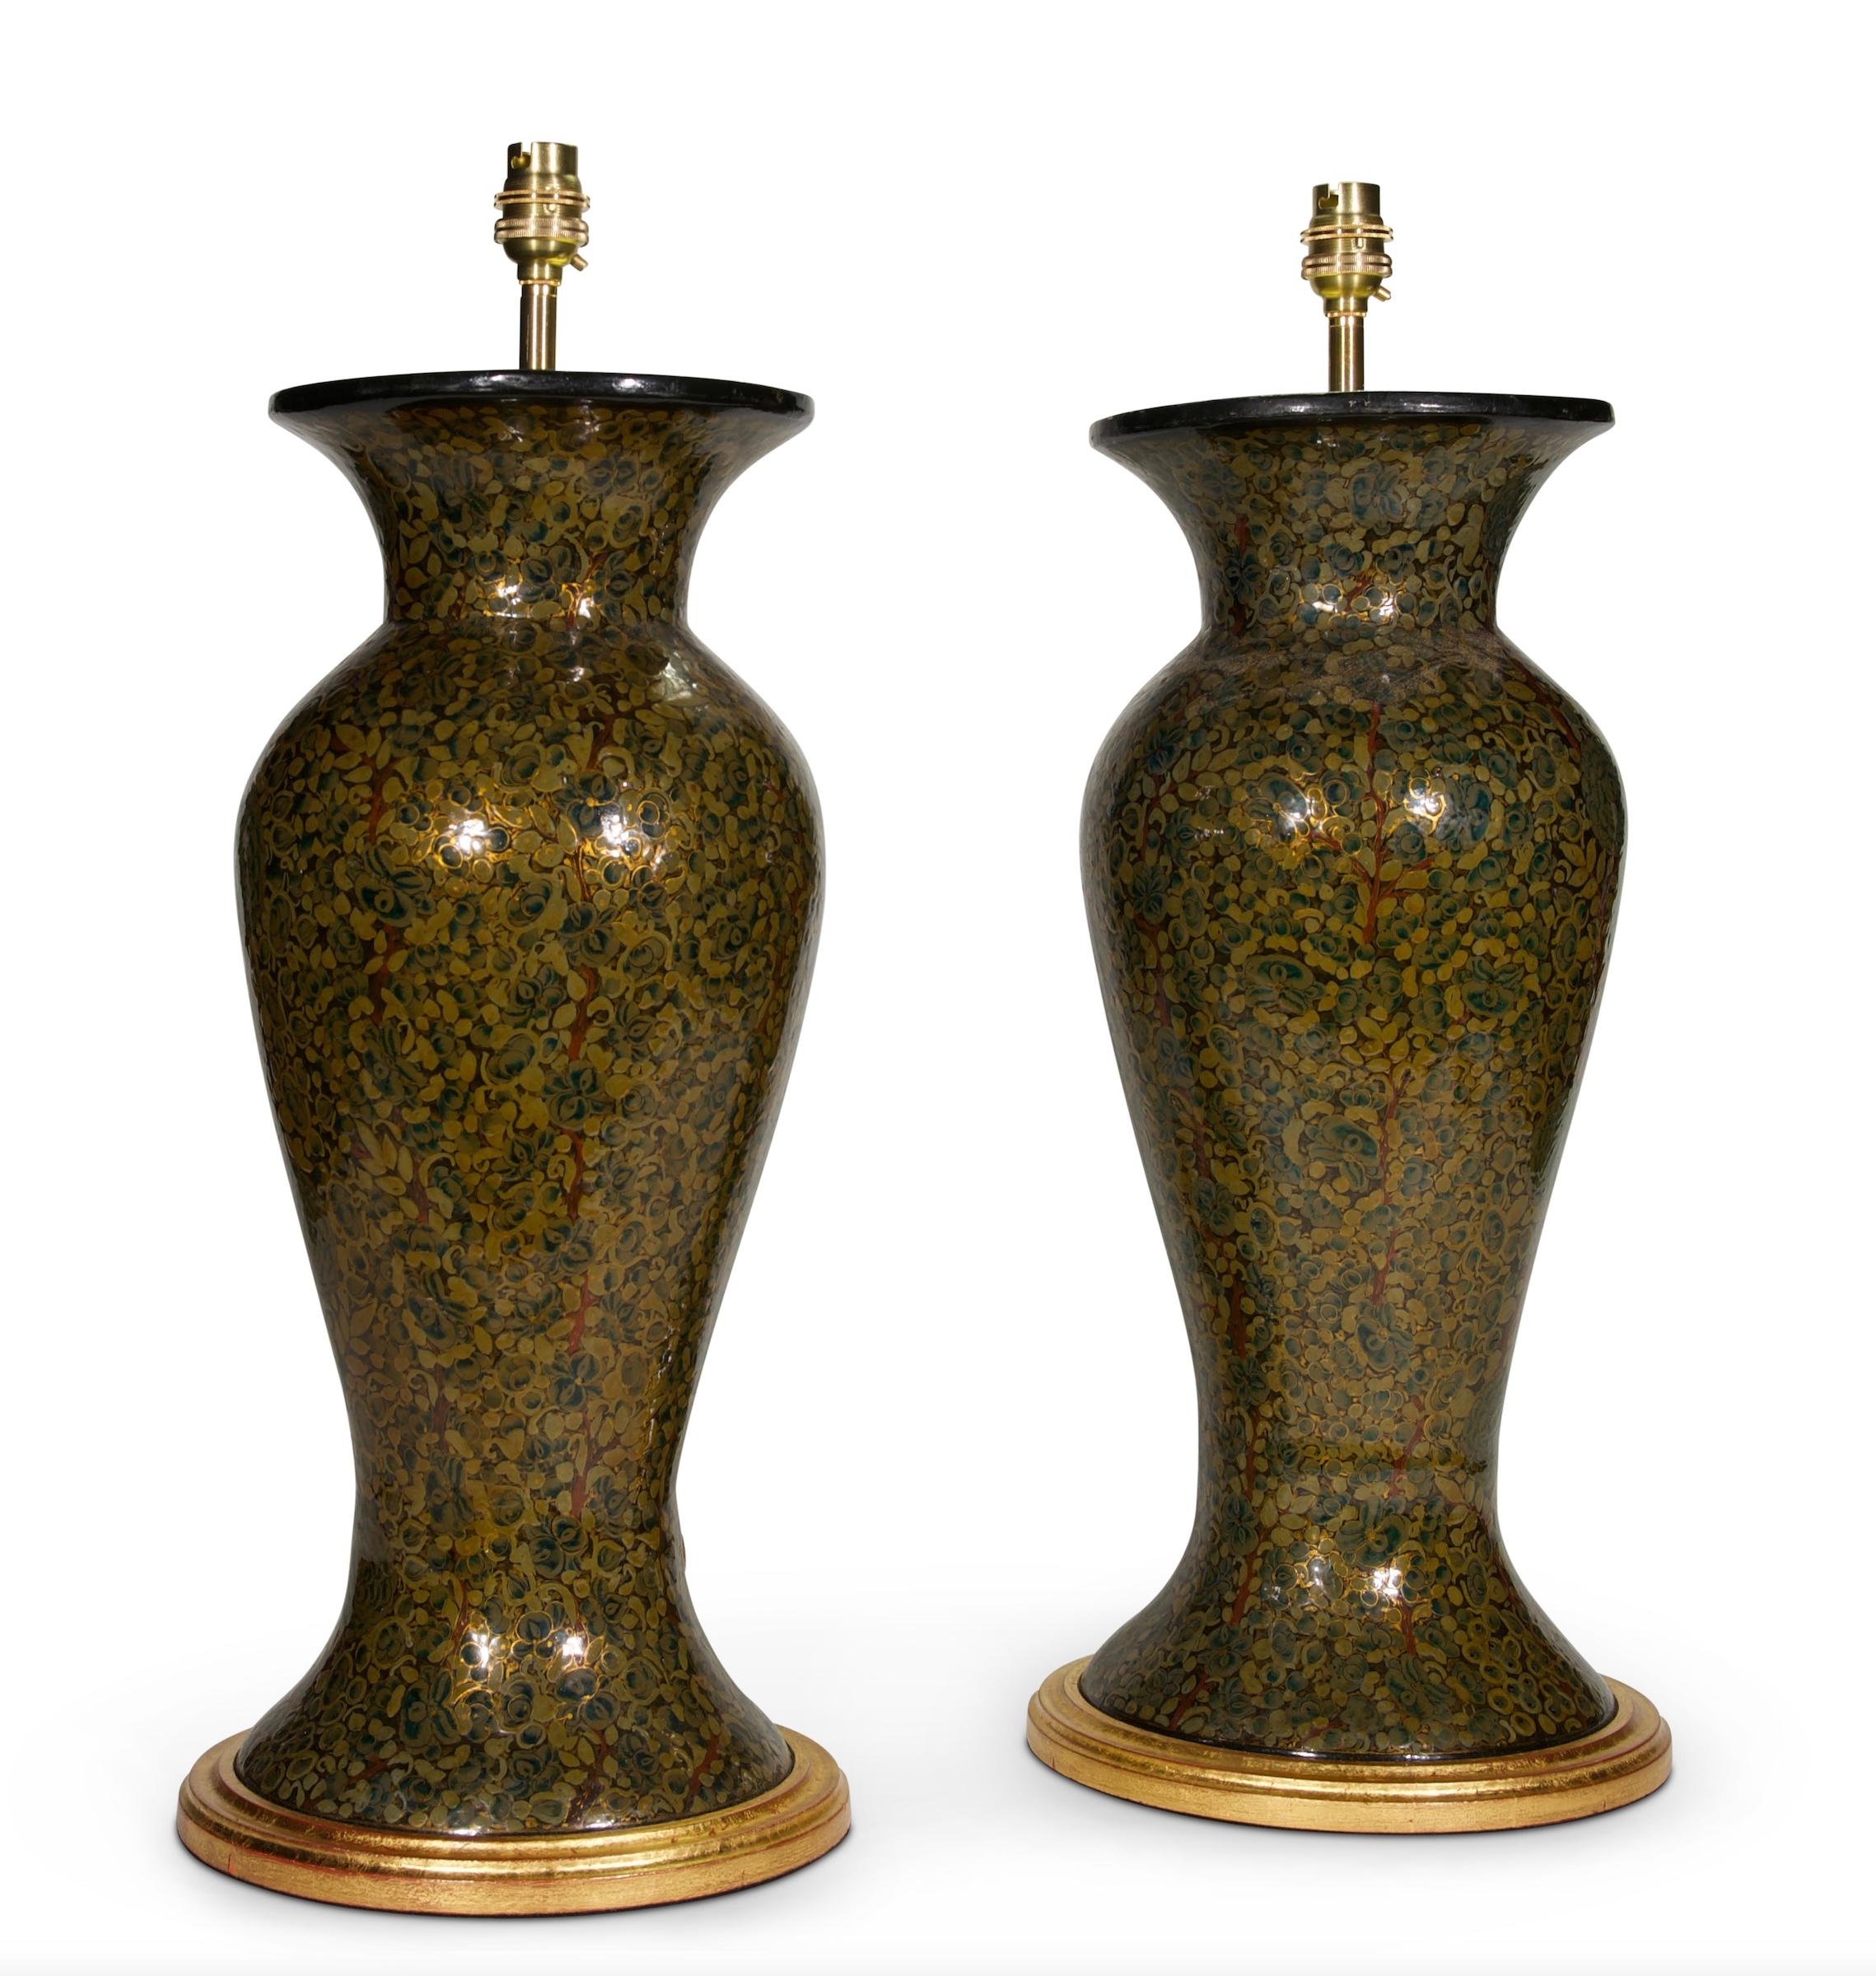 A fine pair of 20th century Kashmiri lacquer baluster vases, decorated thoughout with foliate motifs in tones of green with gilded highlights, now mounted as lamps with hand gilded turned bases.

Measures: height of vass: 18 1/4 in (46.5 cm)